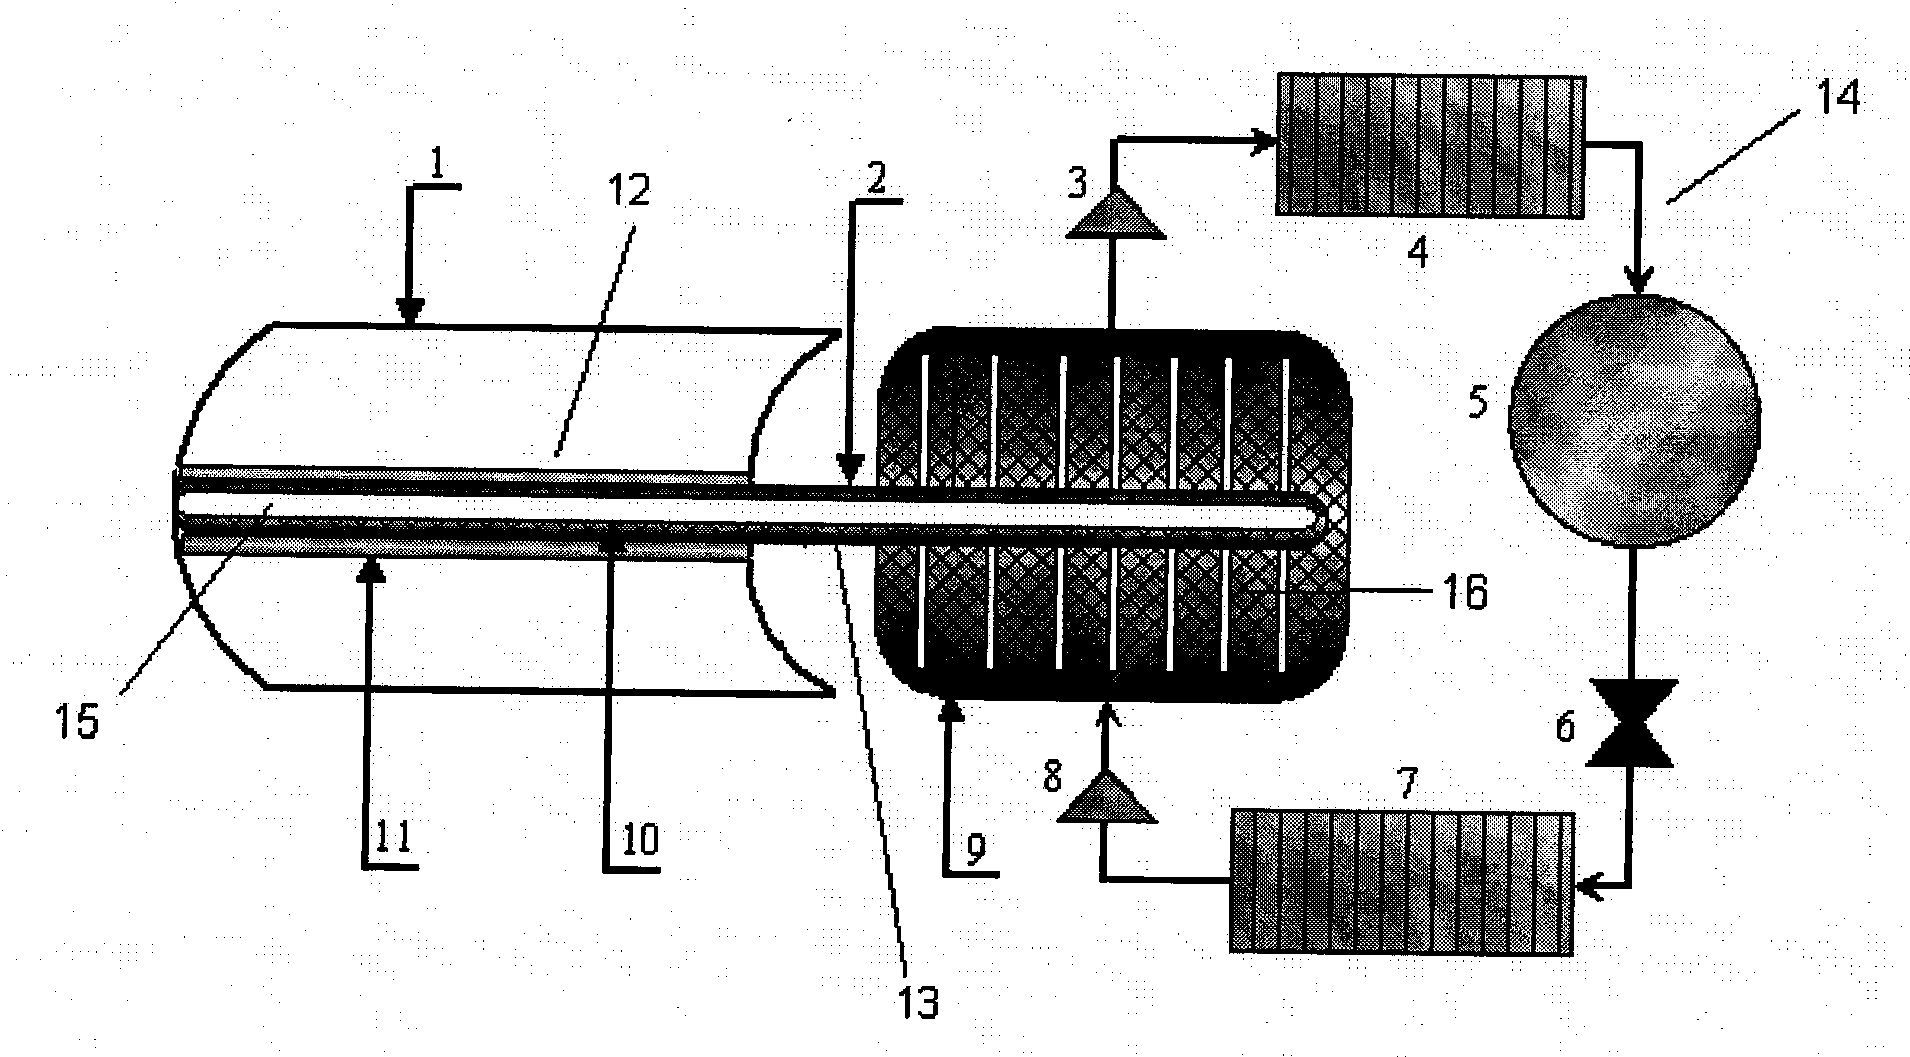 Adsorption refrigeration device driven by parabolic solar thermal collector and heat pipe